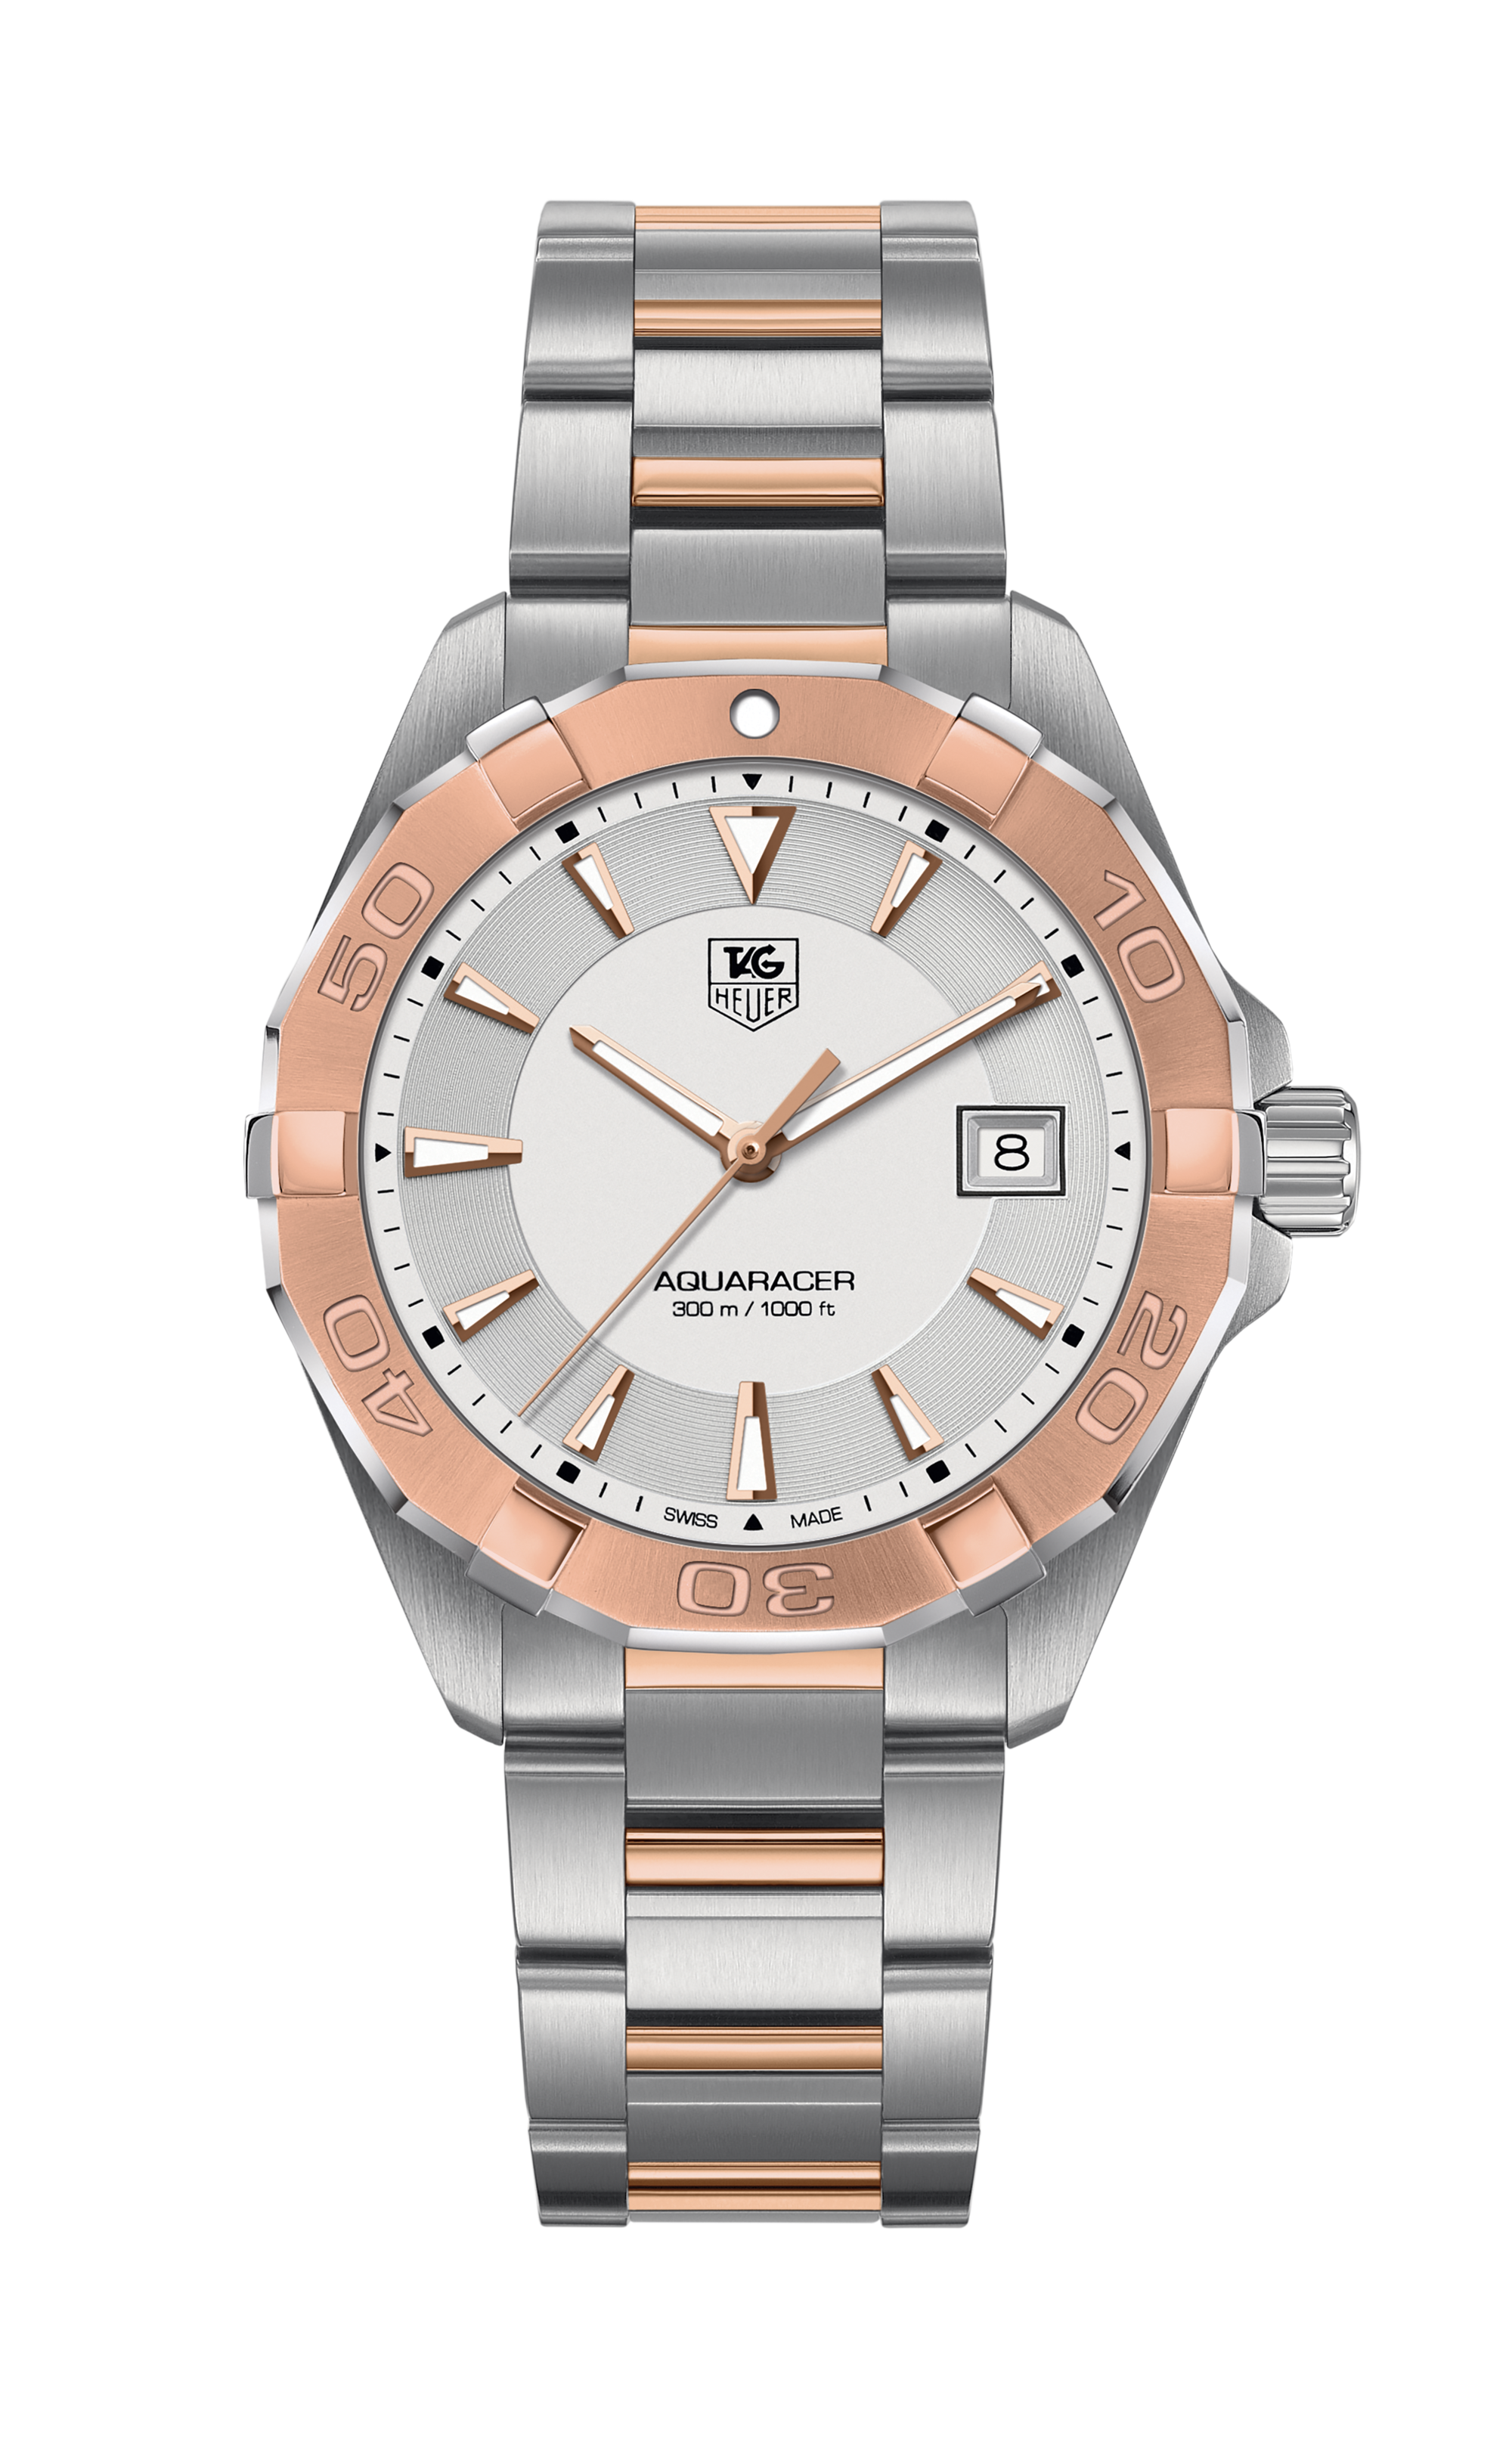 TAG Heuer Monaco Kingsman Special Edition 2020 Brown Diamond Dial Box&PapersTAG Heuer Monaco Kingsman WAW131C 37mm Stainless Steel Men's Watch